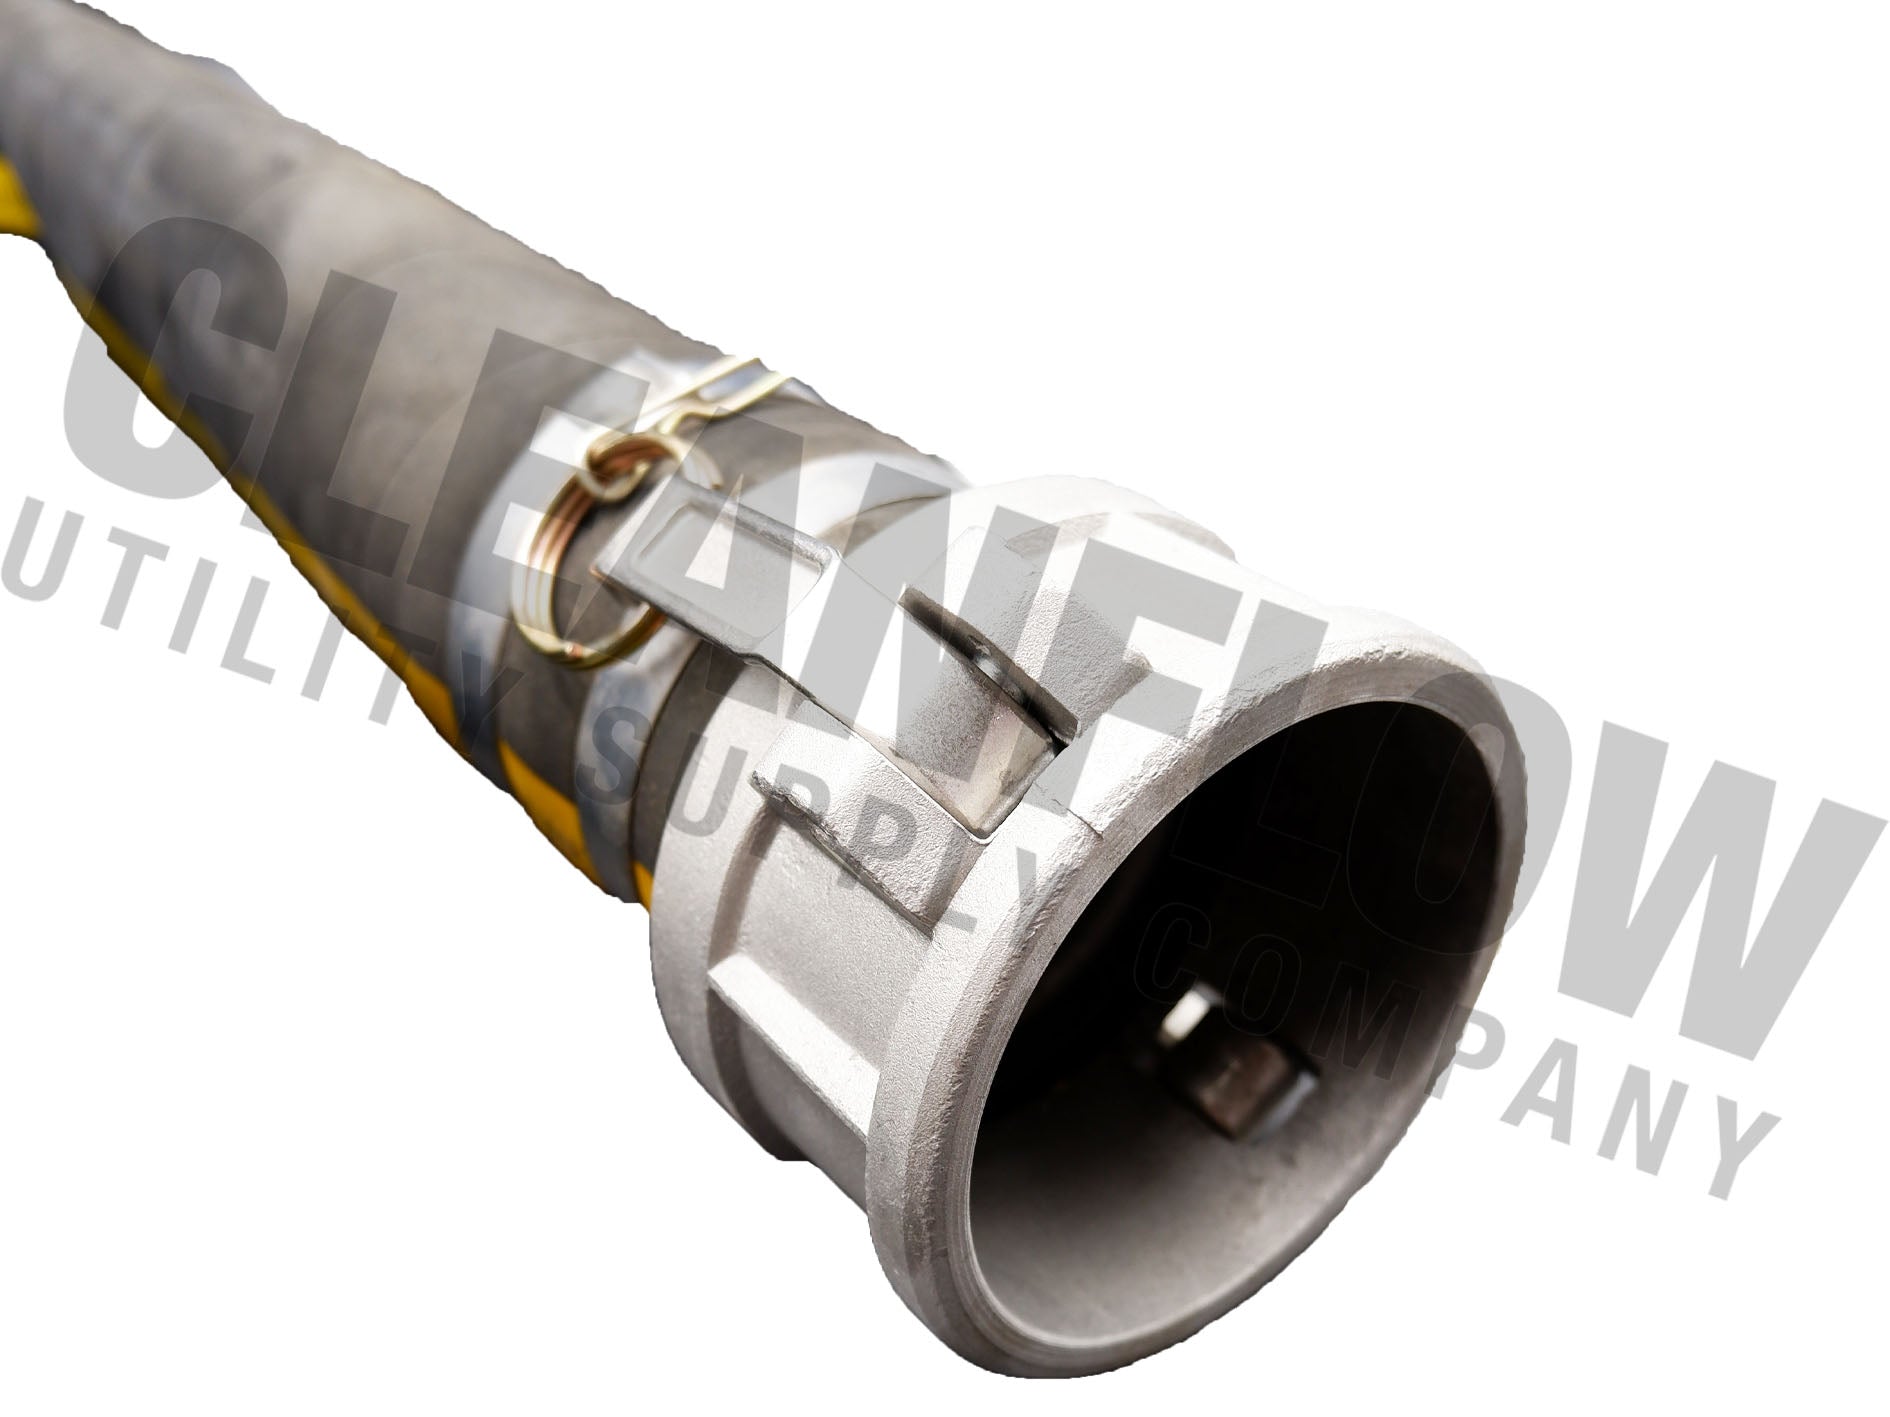 Flow Maxx Contractor's Water Discharge Hose Assemblies (w/ Male X Female Camlocks) - Limited Size Selection Hose and Fittings - Cleanflow